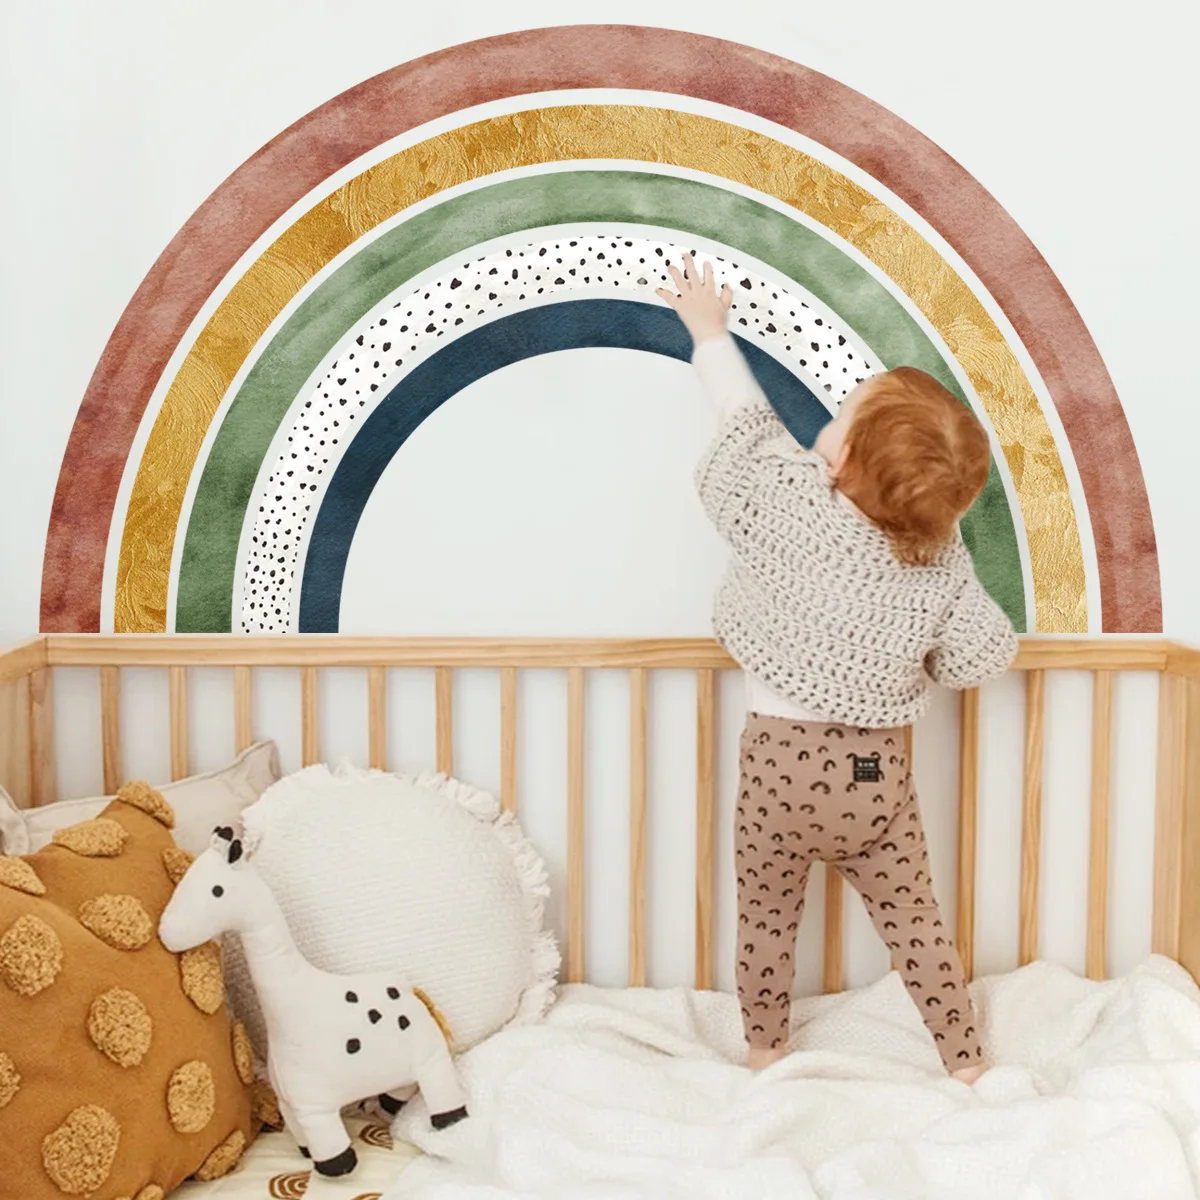 39.5*170cm Large Rainbow Wall Stickers Living Room Background Wall Children's Room Decorative Wall Stickers Wallpaper Bm4052 39 5 170cm large rainbow wall stickers living room background wall children s room decorative wall stickers wallpaper bm4052